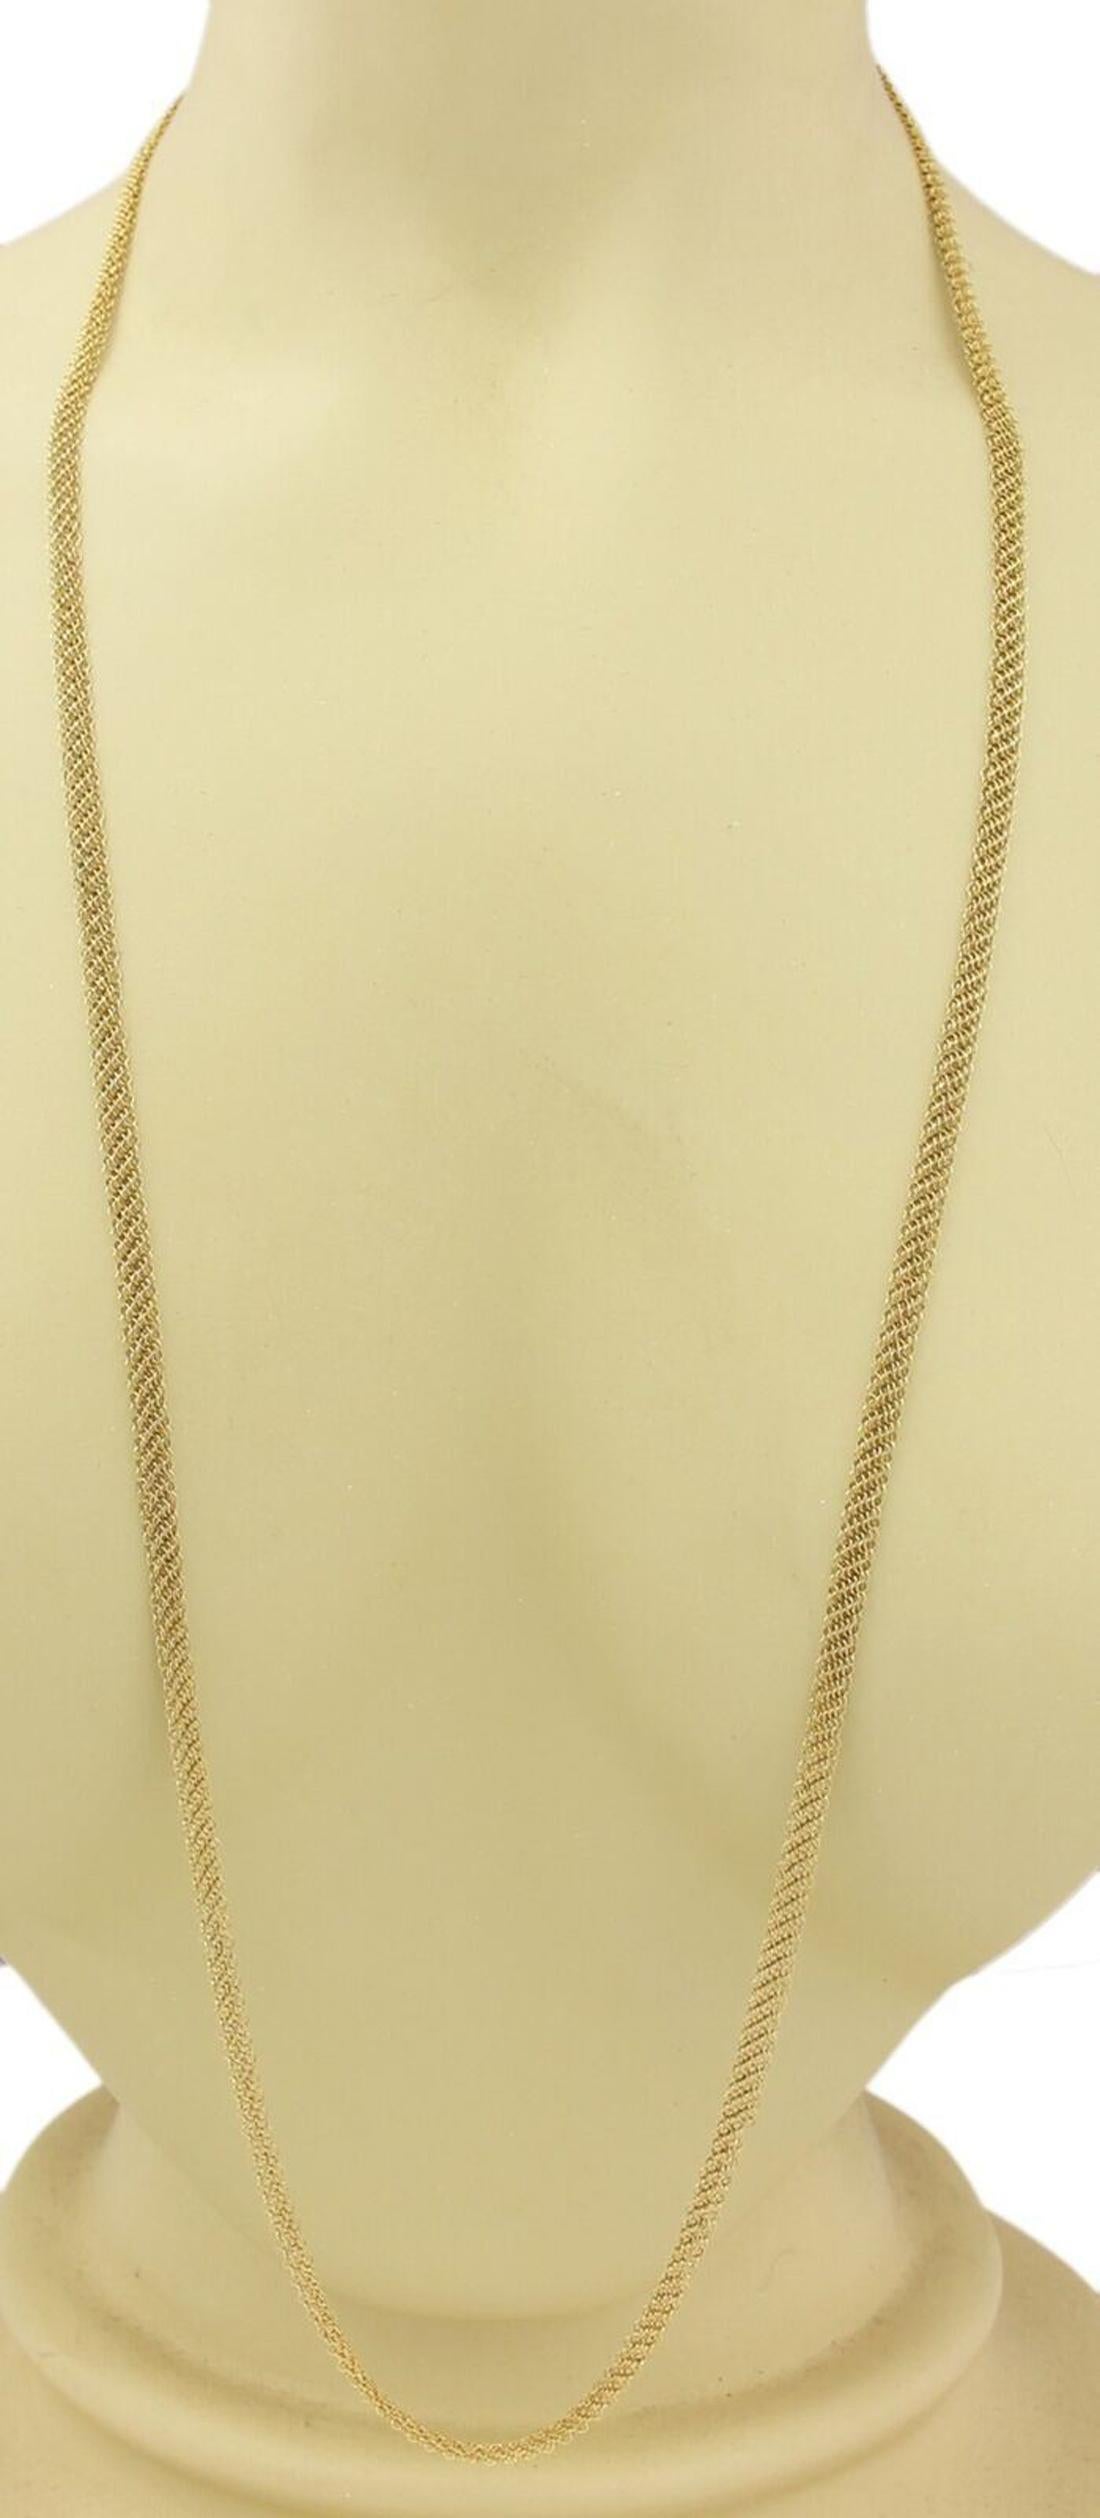 gold mesh chain necklace